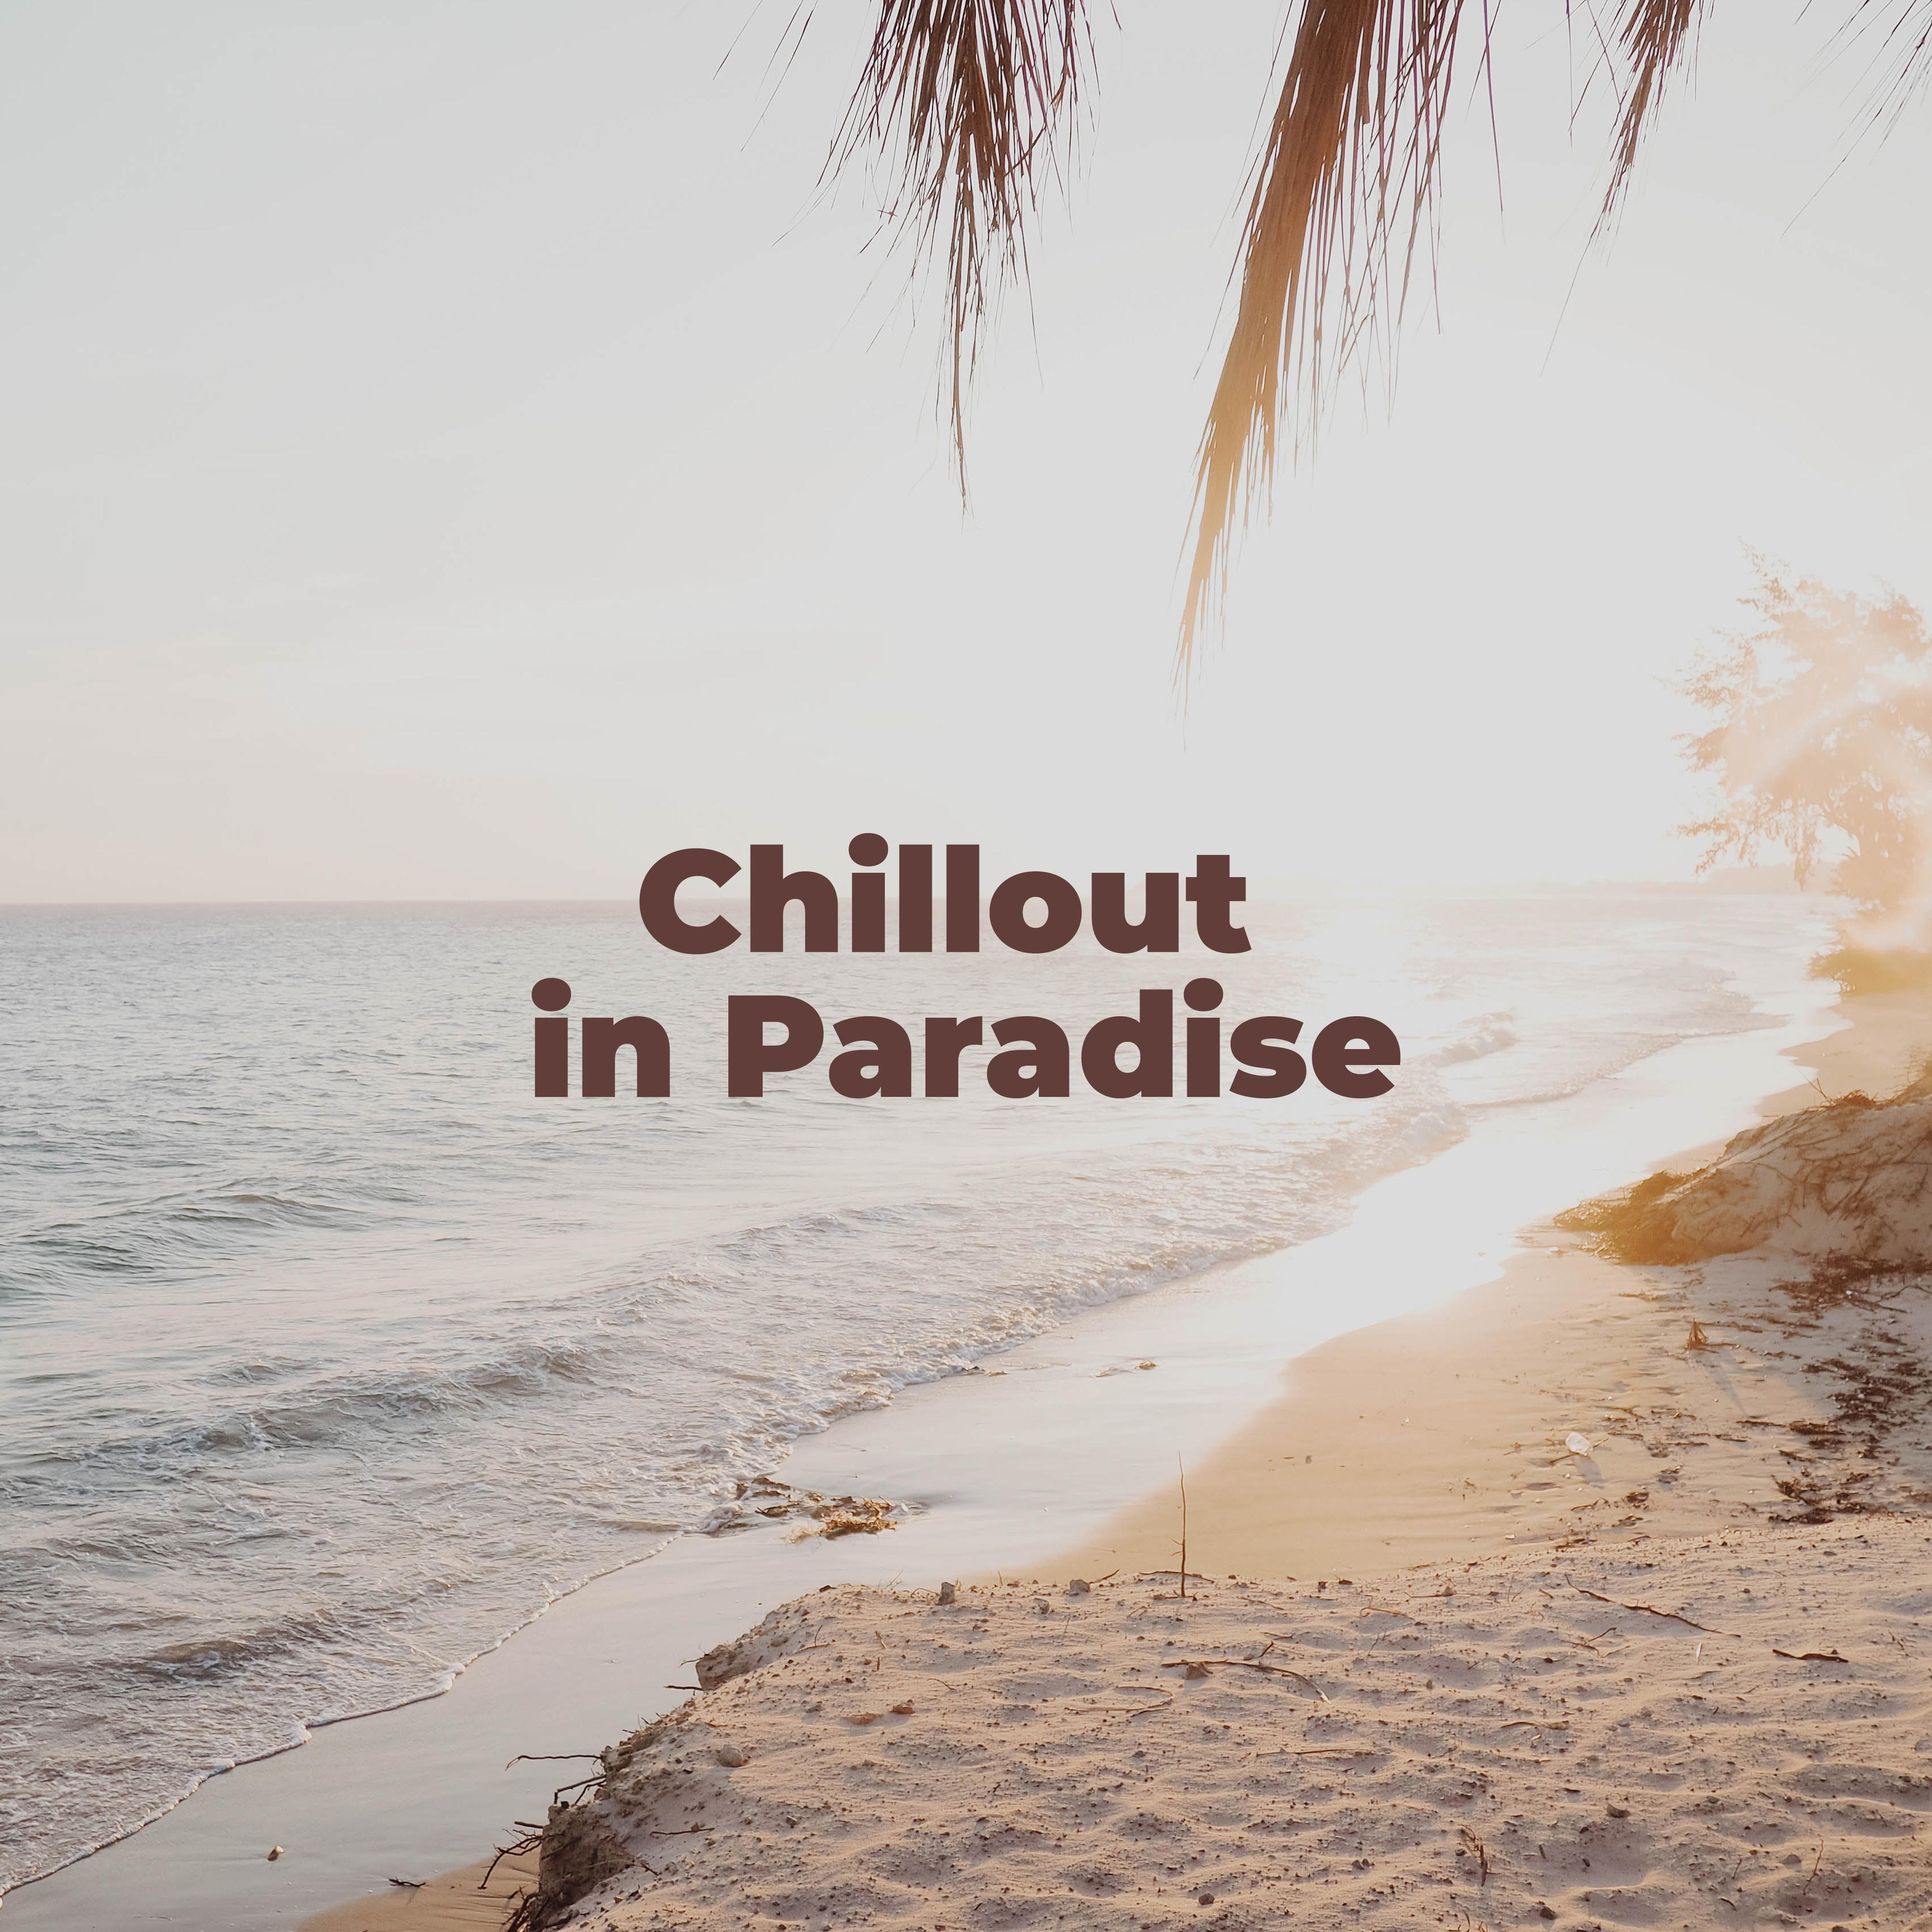 Chillout in Paradise